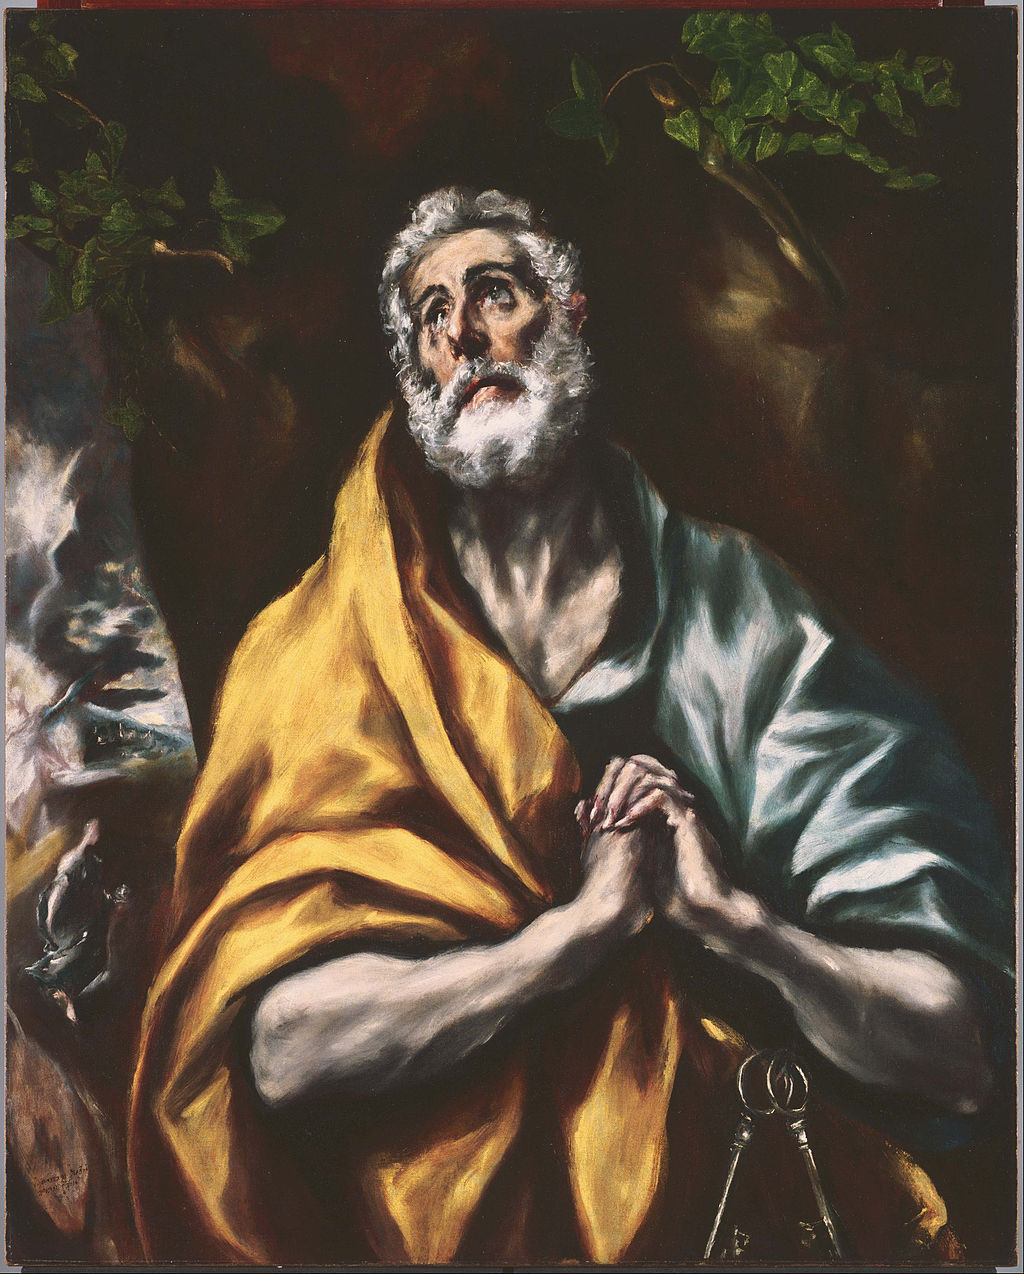 The Repentant Saint Peter by El Greco (Phillips Collection)